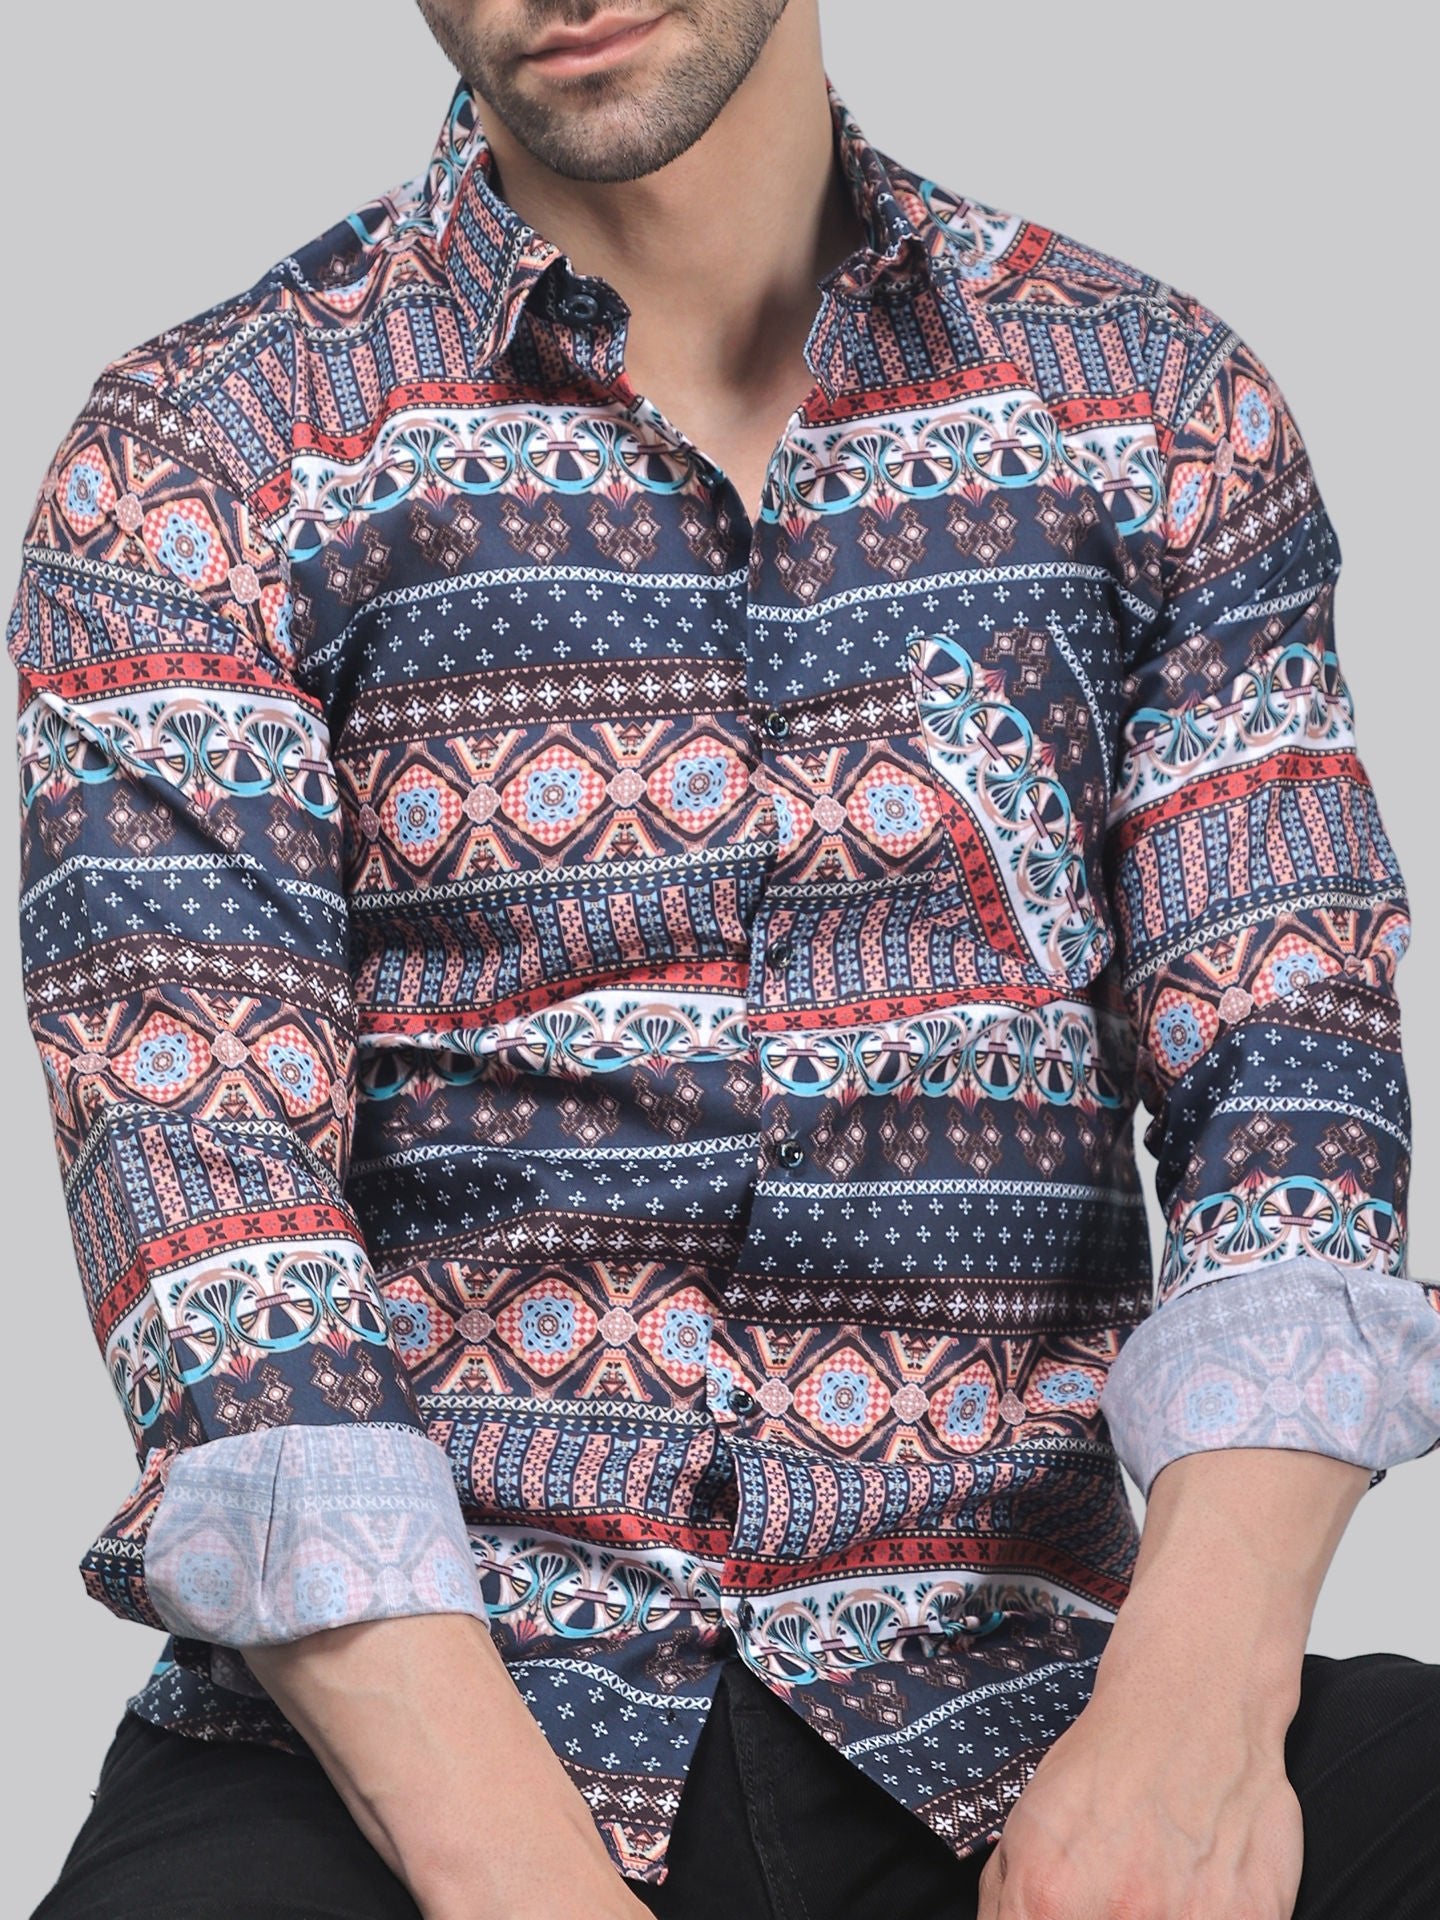 TryBuy Men's Trendy Party-wear Linen Casual Printed Full Sleeves Shirt - TryBuy® USA🇺🇸